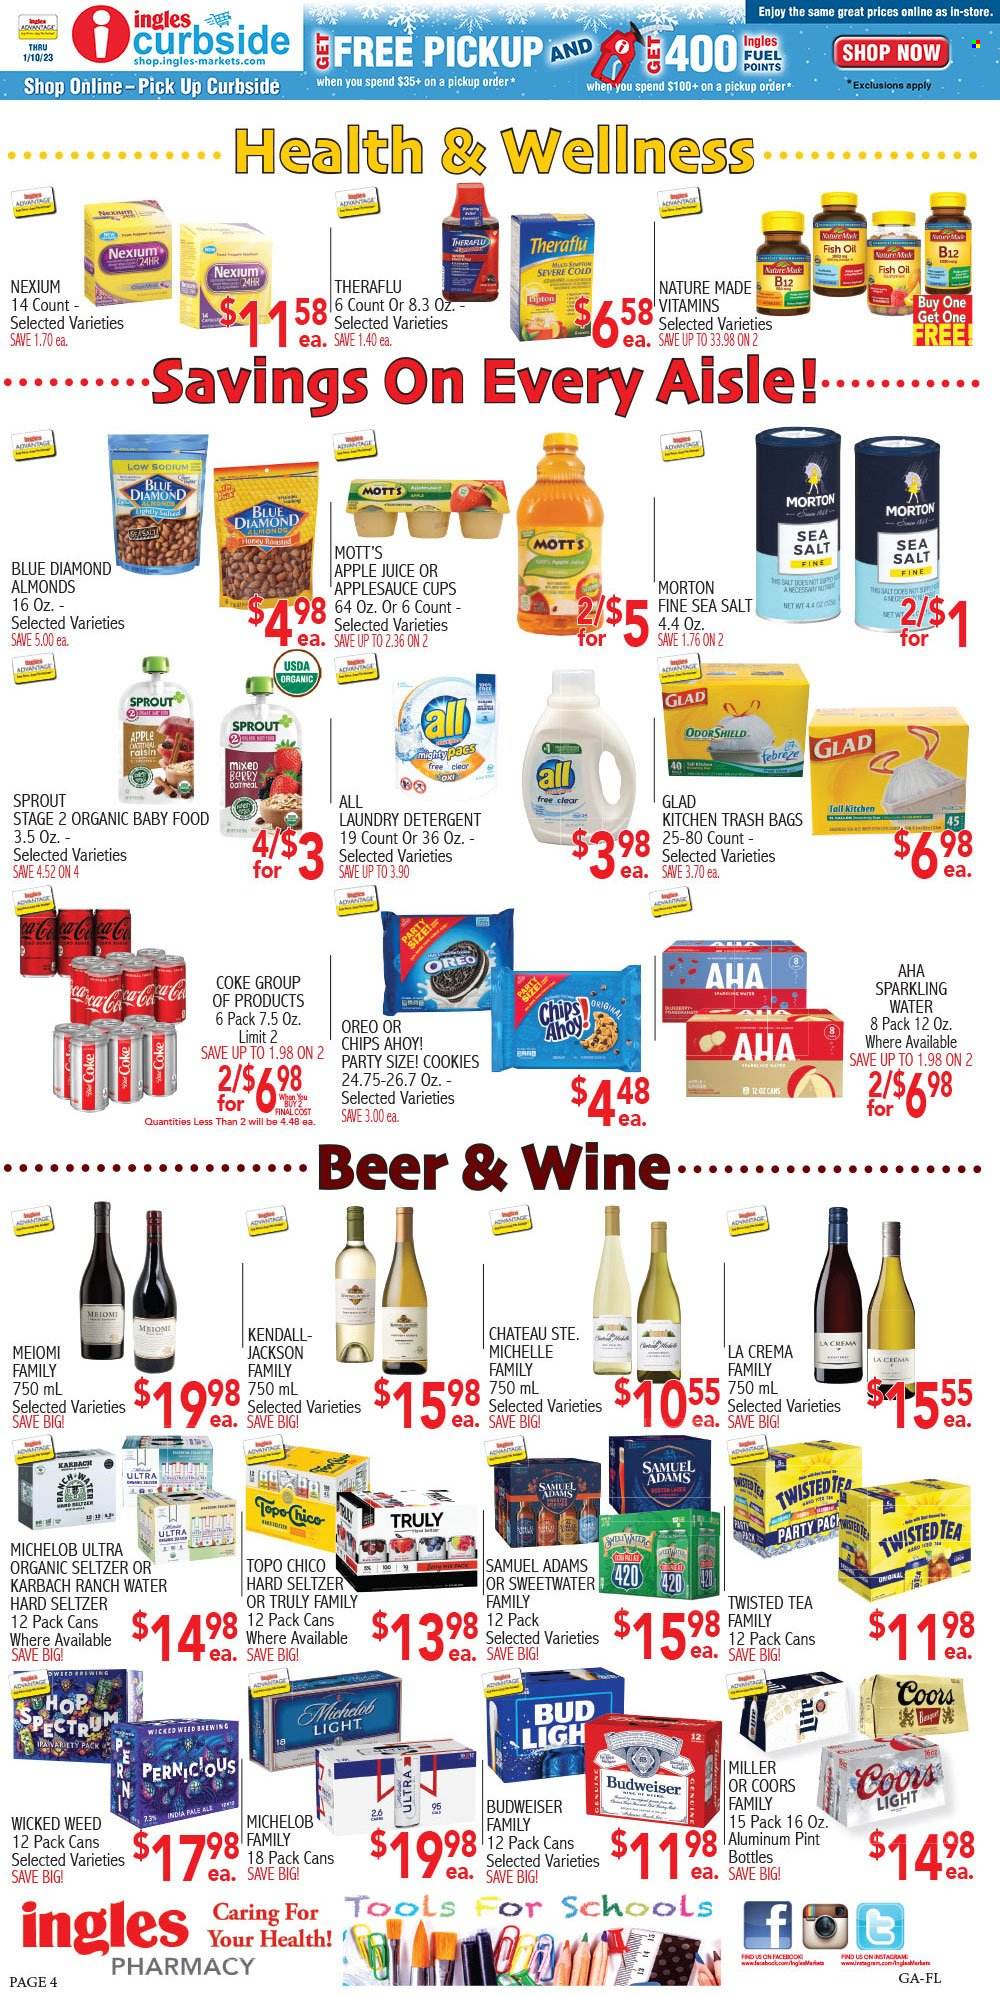 thumbnail - Ingles Flyer - 11/25/2022 - 11/29/2022 - Sales products - Mott's, cookies, Chips Ahoy!, chips, oatmeal, oil, apple sauce, honey, almonds, Blue Diamond, apple juice, Coca-Cola, juice, sparkling water, tea, Hard Seltzer, TRULY, beer, Miller, organic baby food, detergent, Febreze, laundry detergent, bag, trash bags, cup, fish oil, Nature Made, Theraflu, Nexium, Spectrum, Budweiser, Coors, Twisted Tea, Michelob. Page 4.